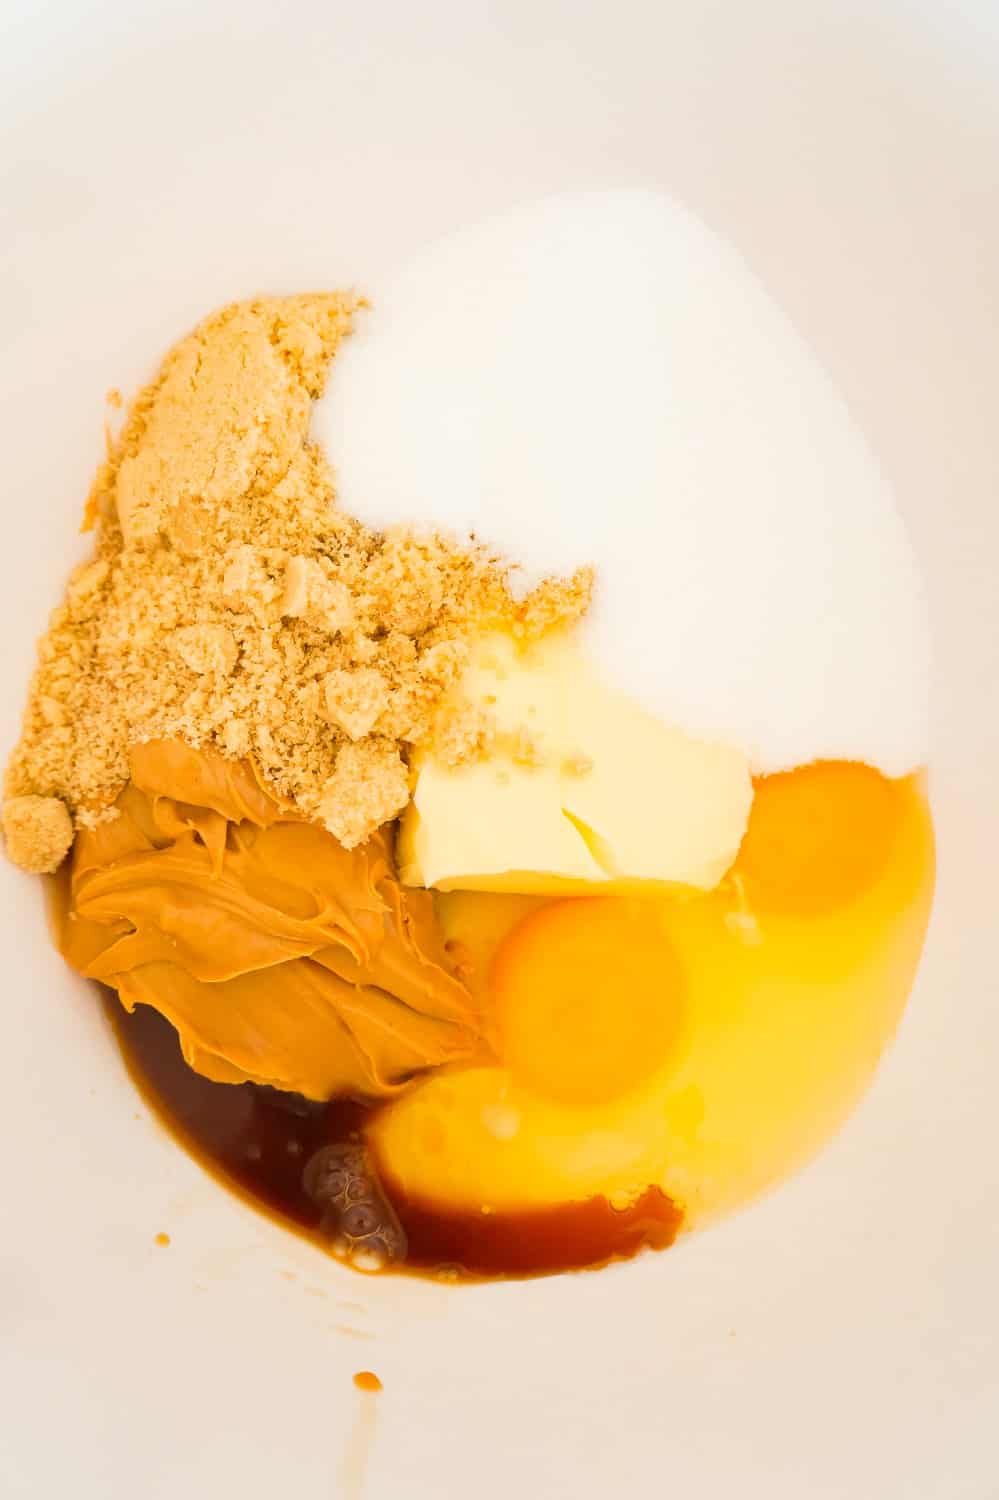 eggs, peanut butter sugar, brown sugar and vanilla extract in a mixing bowl